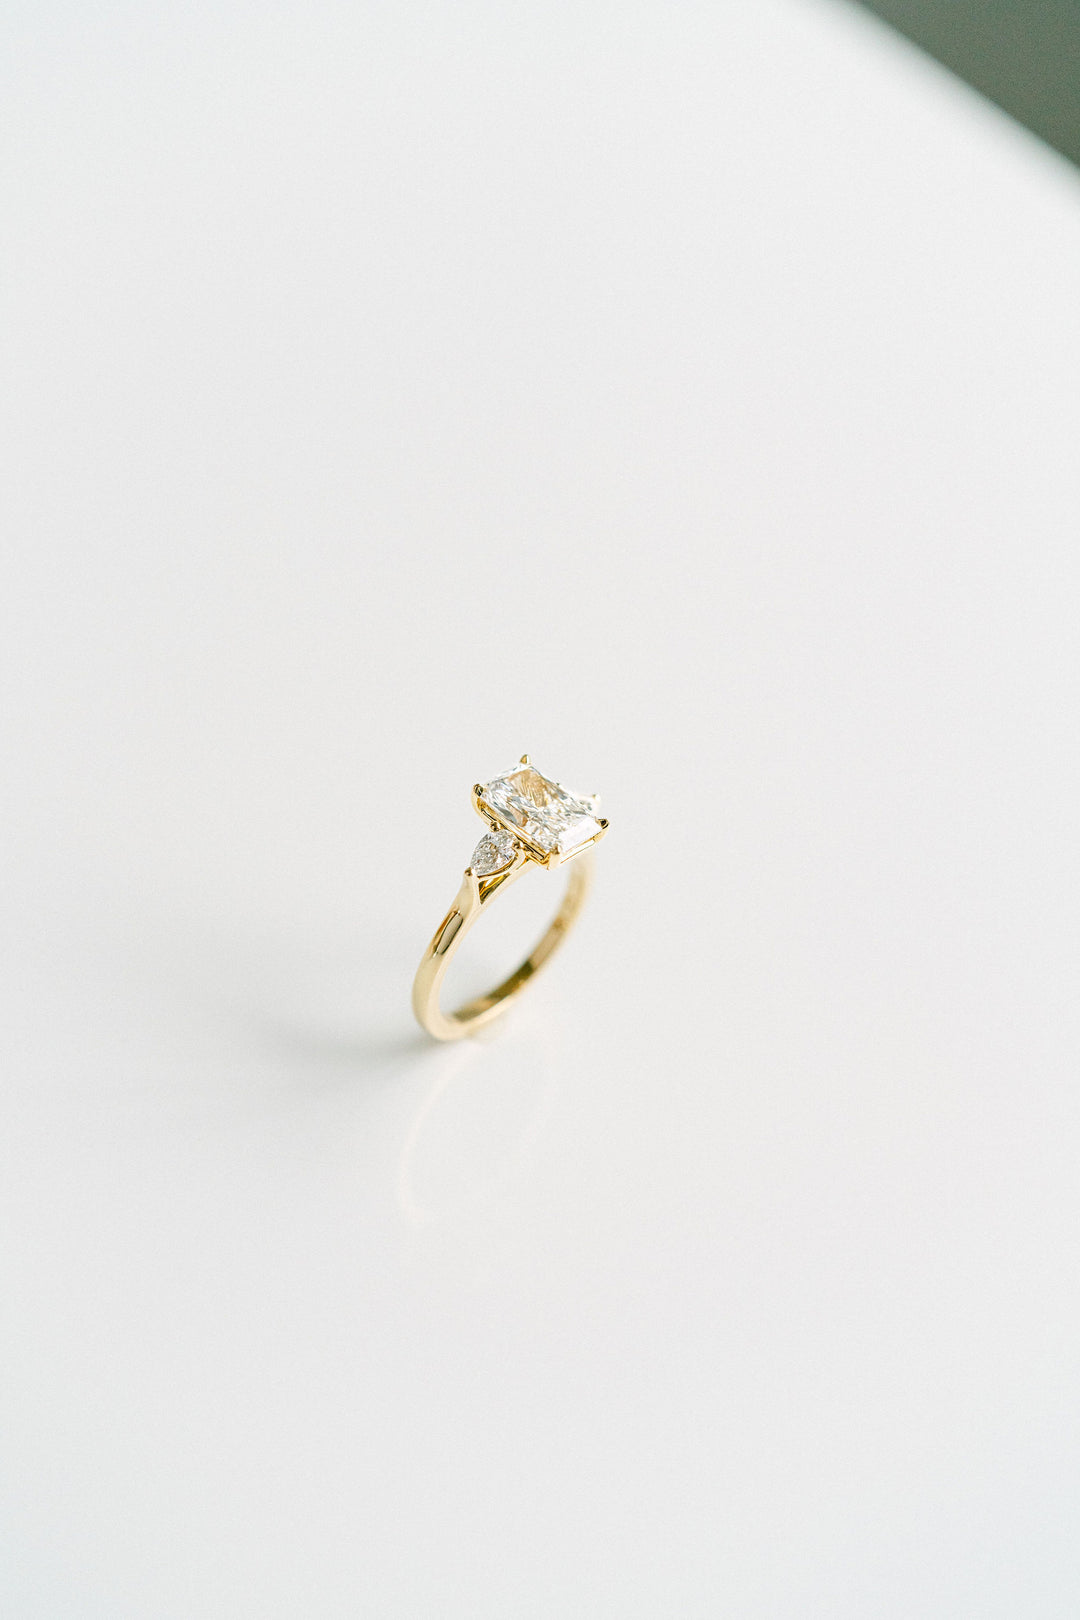 Radiant Cut Diamond Engagement Ring With Pear Shape Accents, 14k Yellow Gold